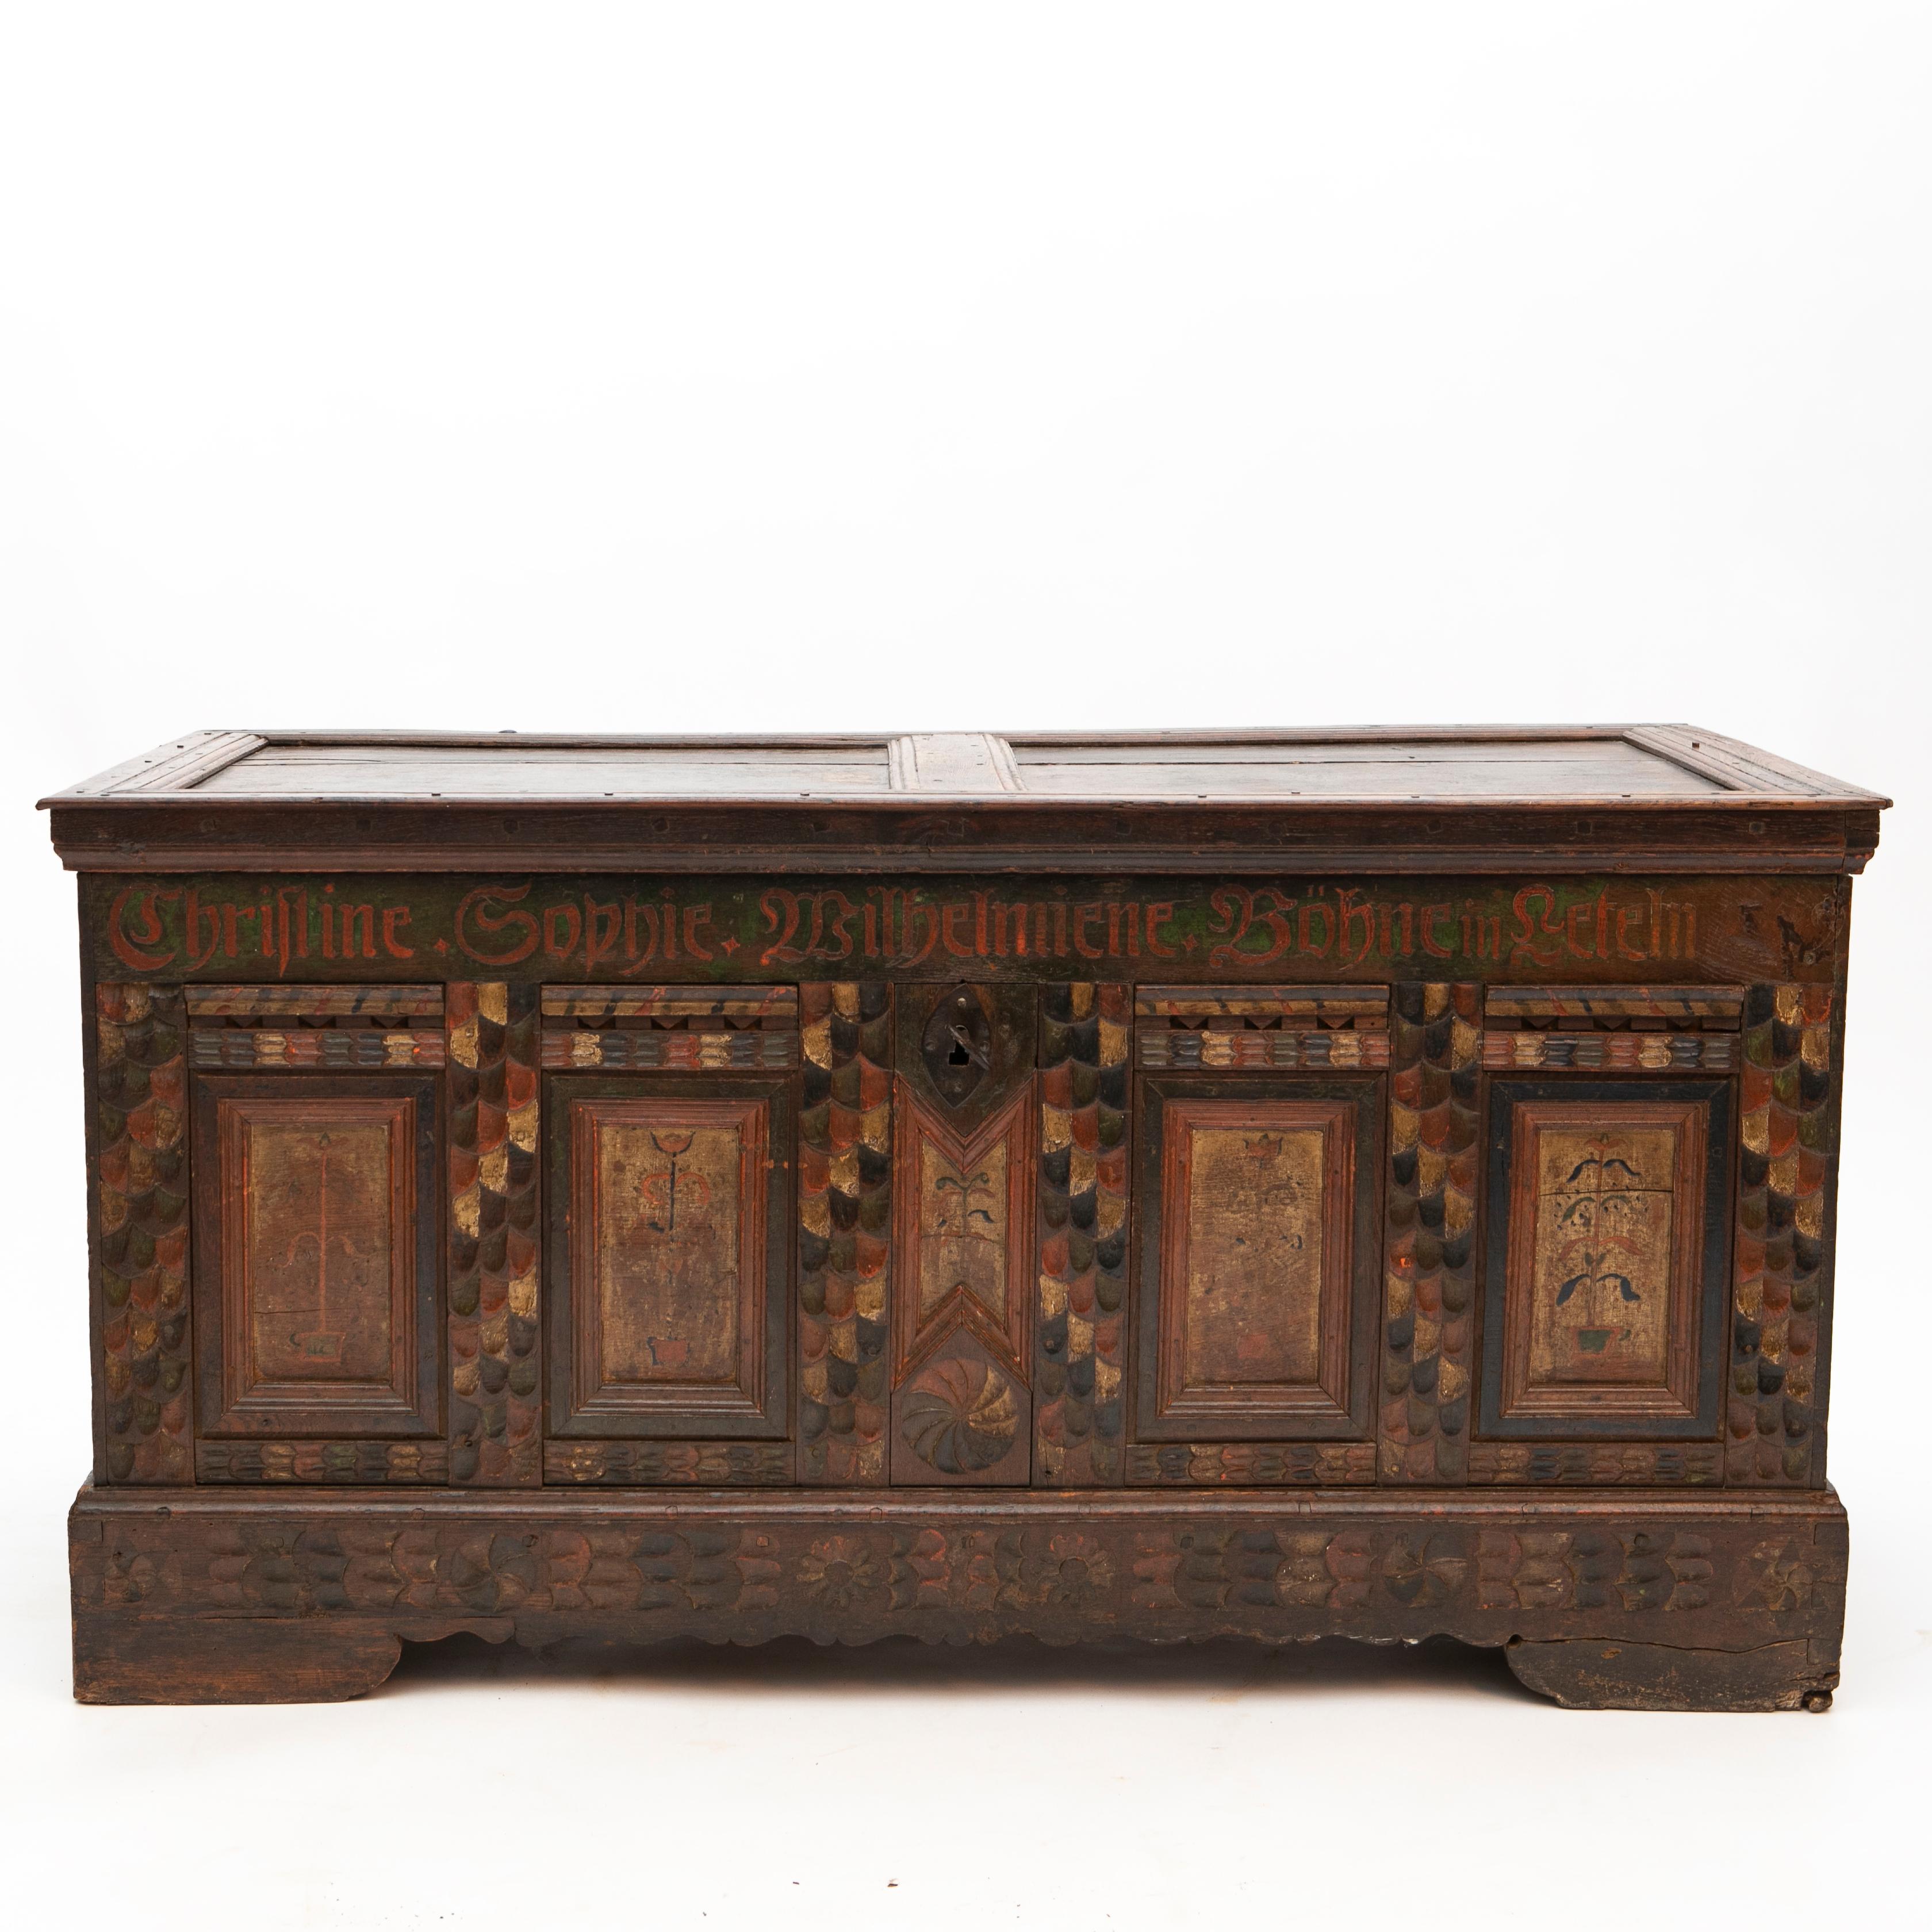 German baroque storage chest or trunk in its original condition.
Hand carved in oak with polychrome hand decorated facade. Top of panel with inscription 